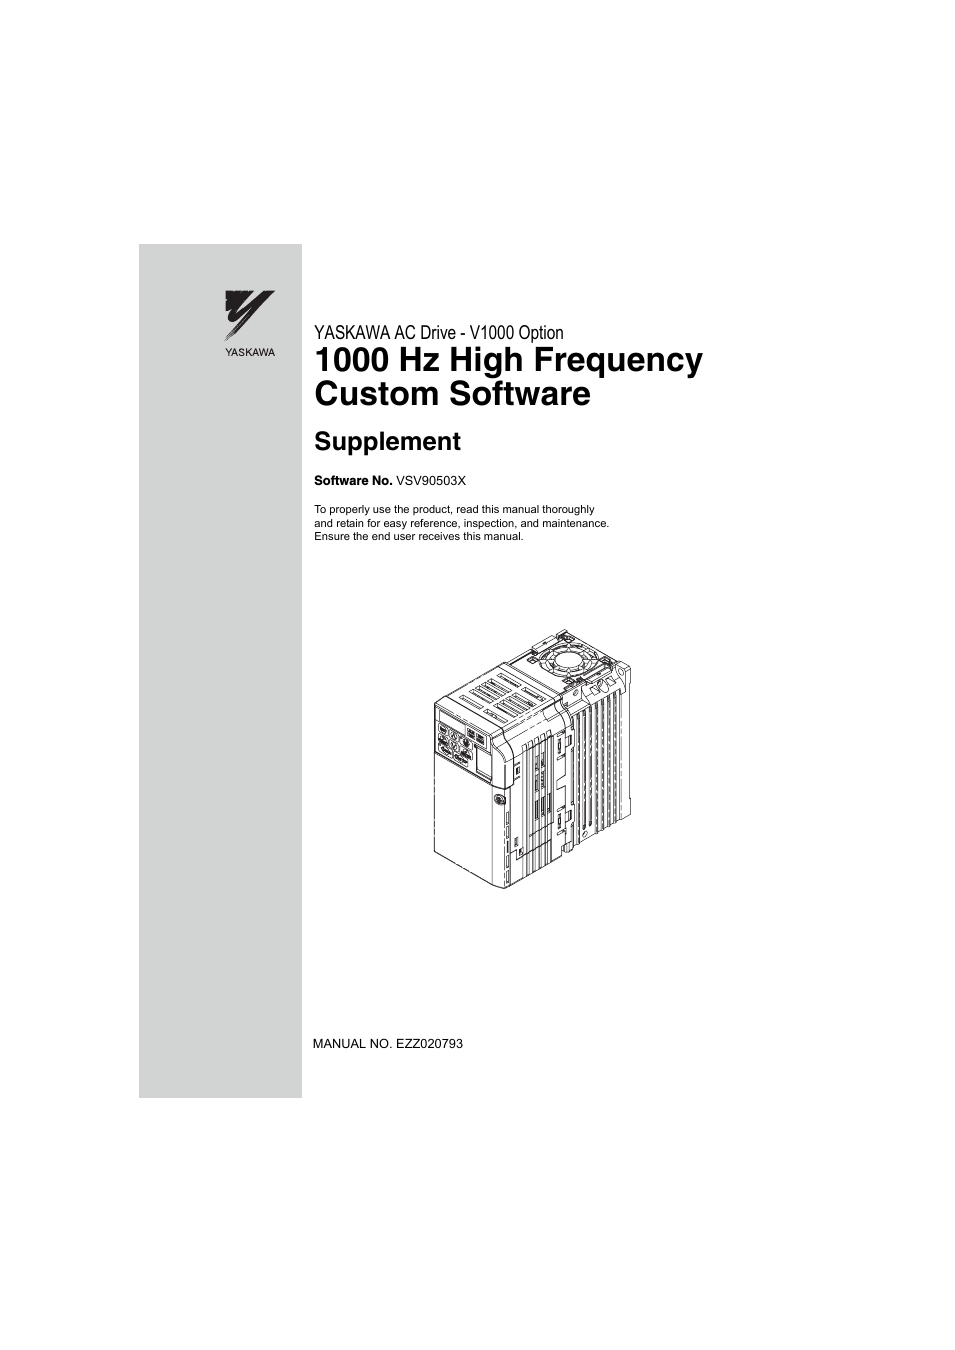 1000 Hz High Frequency